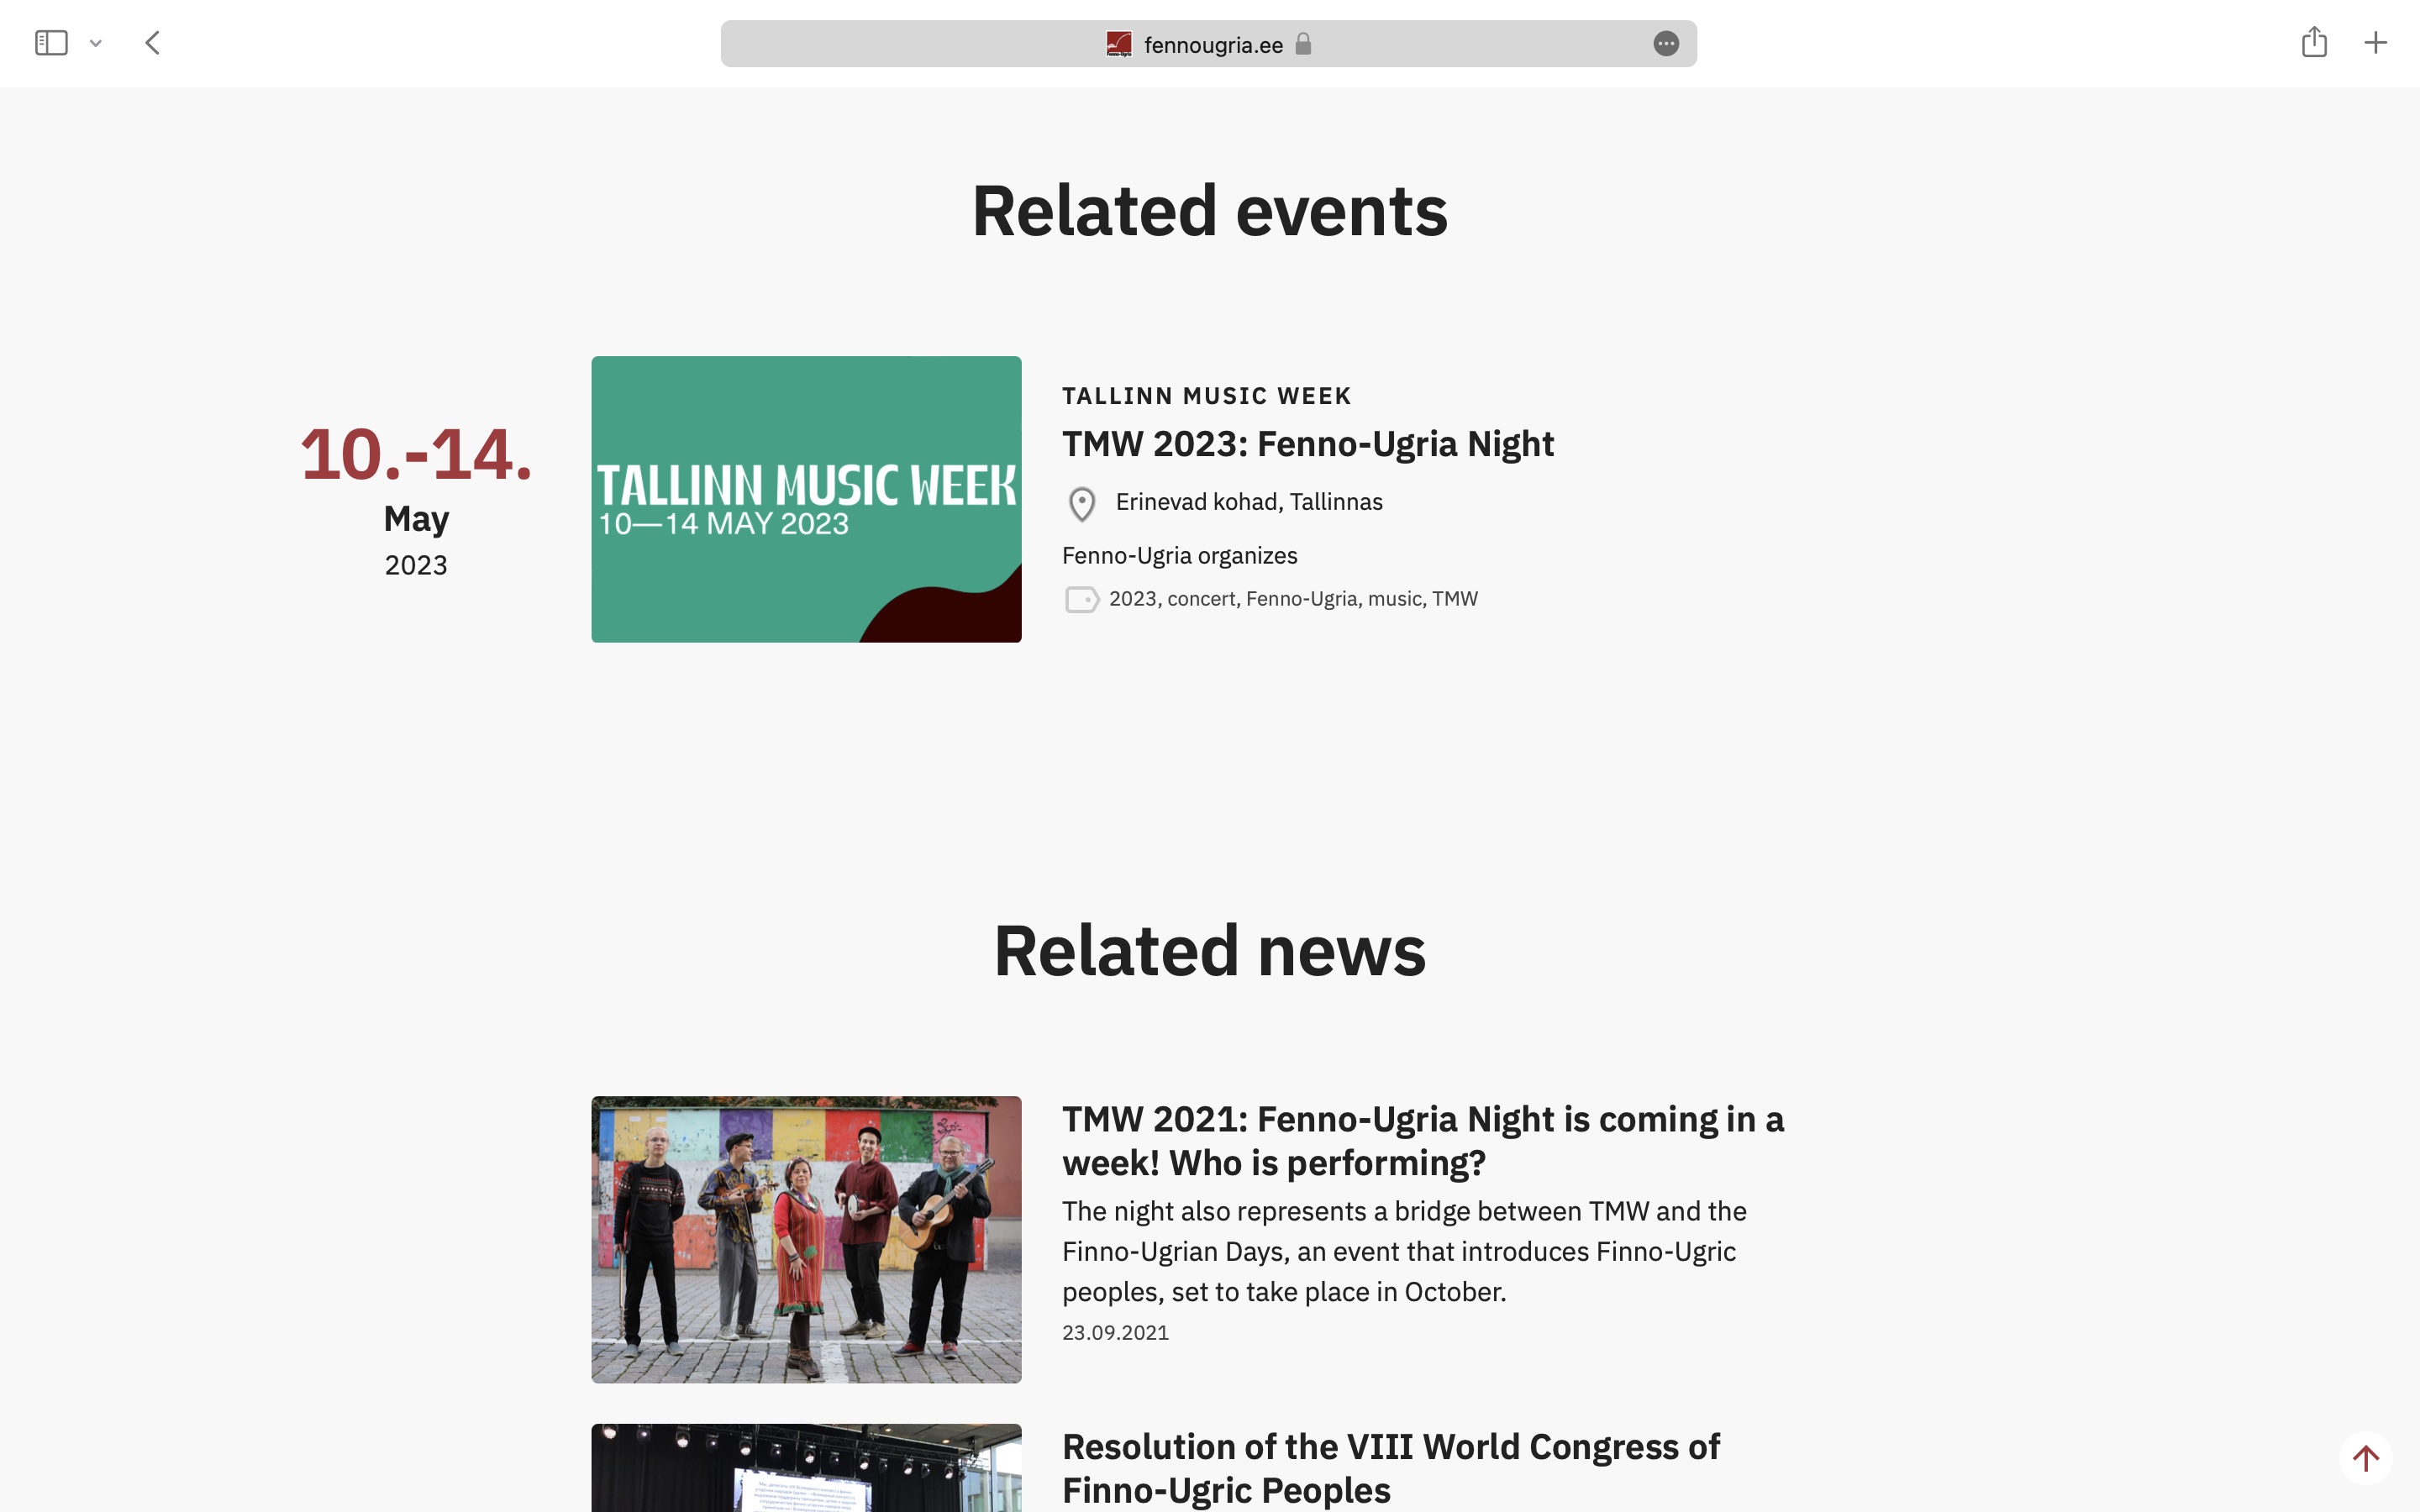 Related events and news